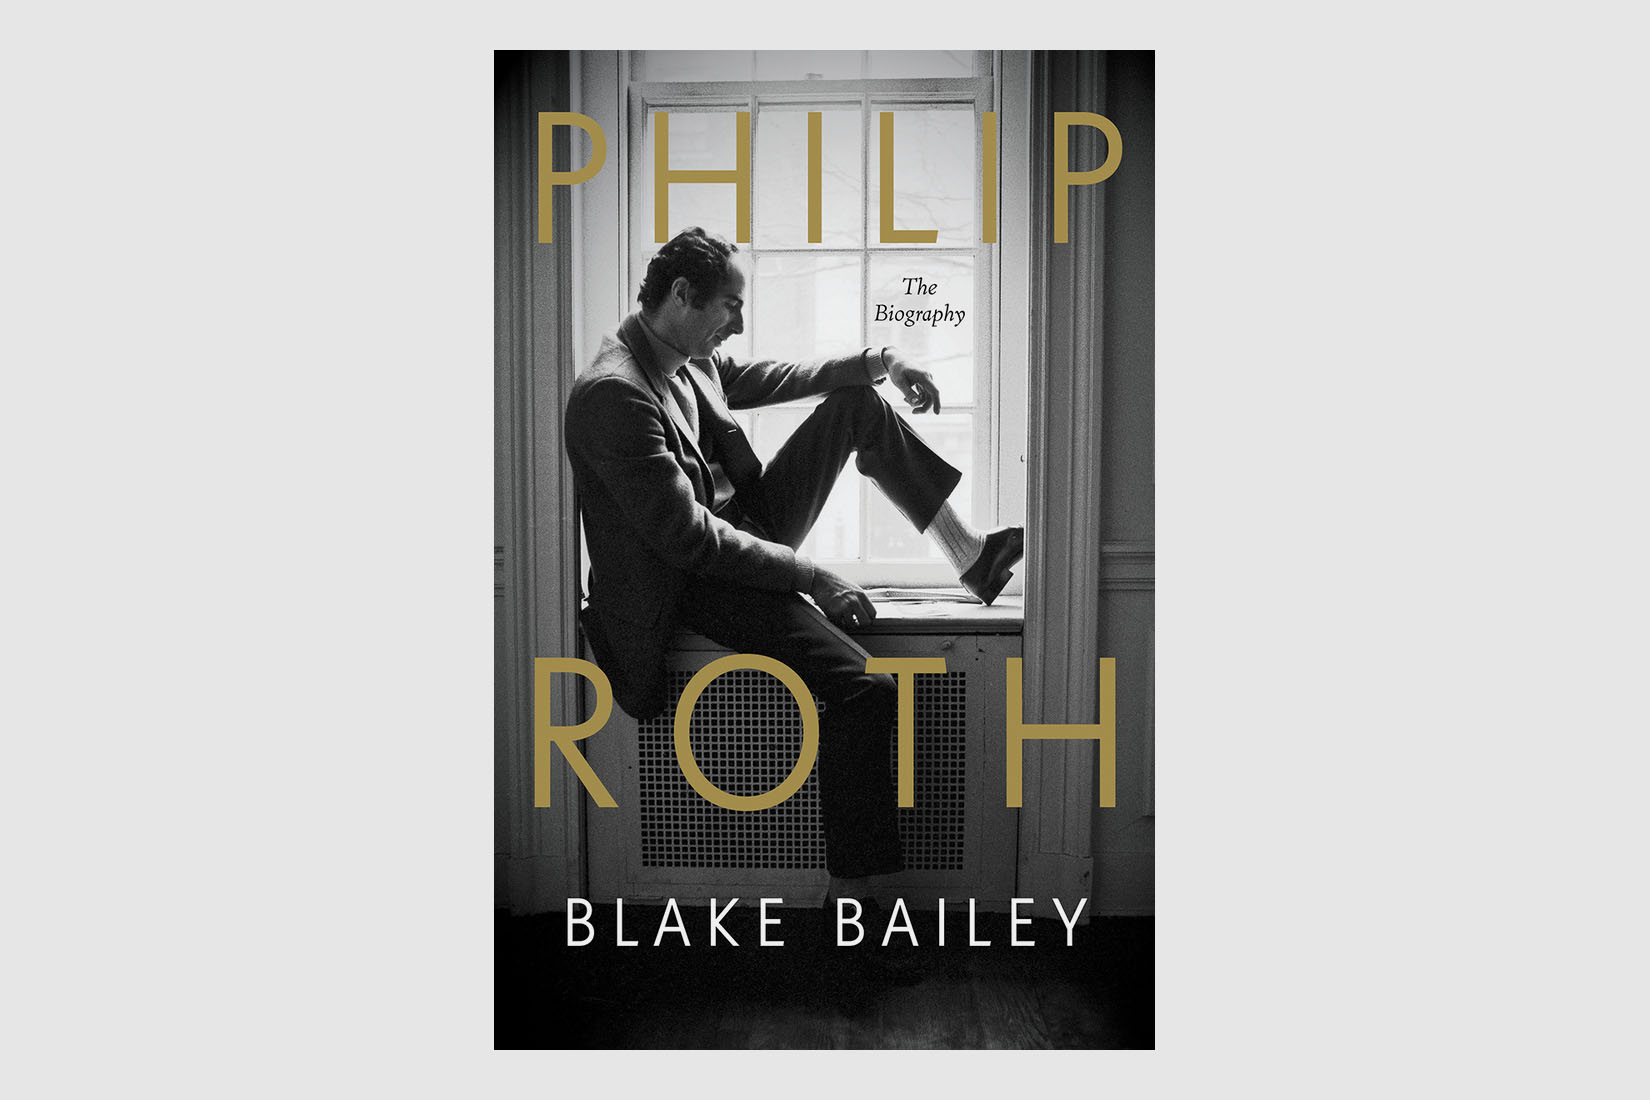 Blake Bailey's "Philip Roth" is out now